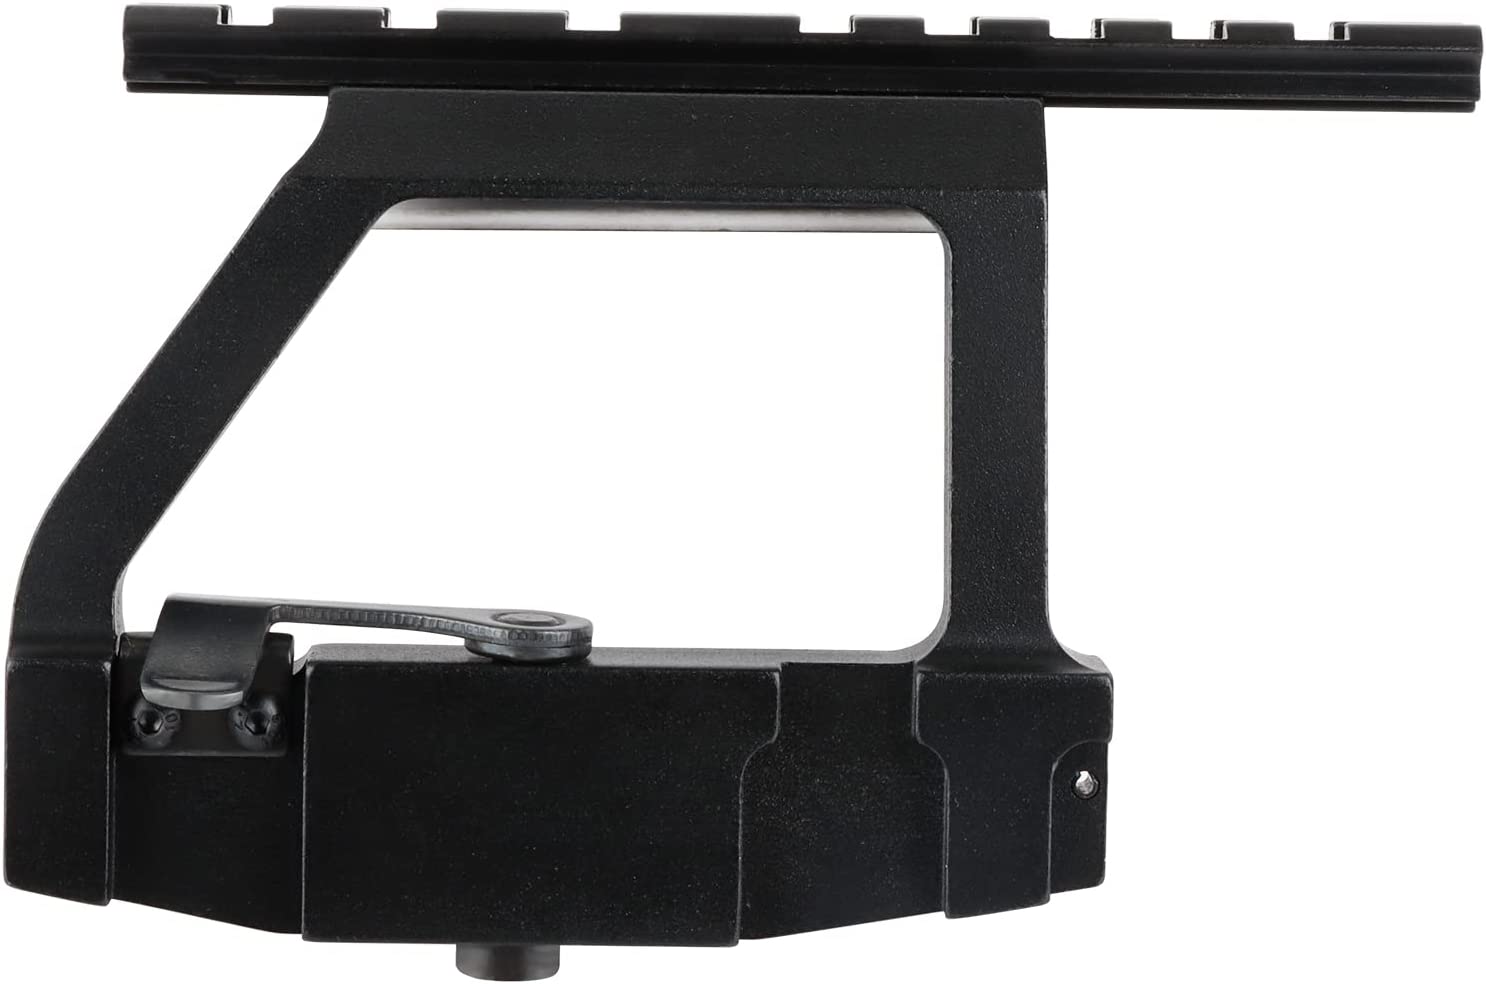  ACEXIER QD Quick Release Mount Adapter 5 Slots Fit